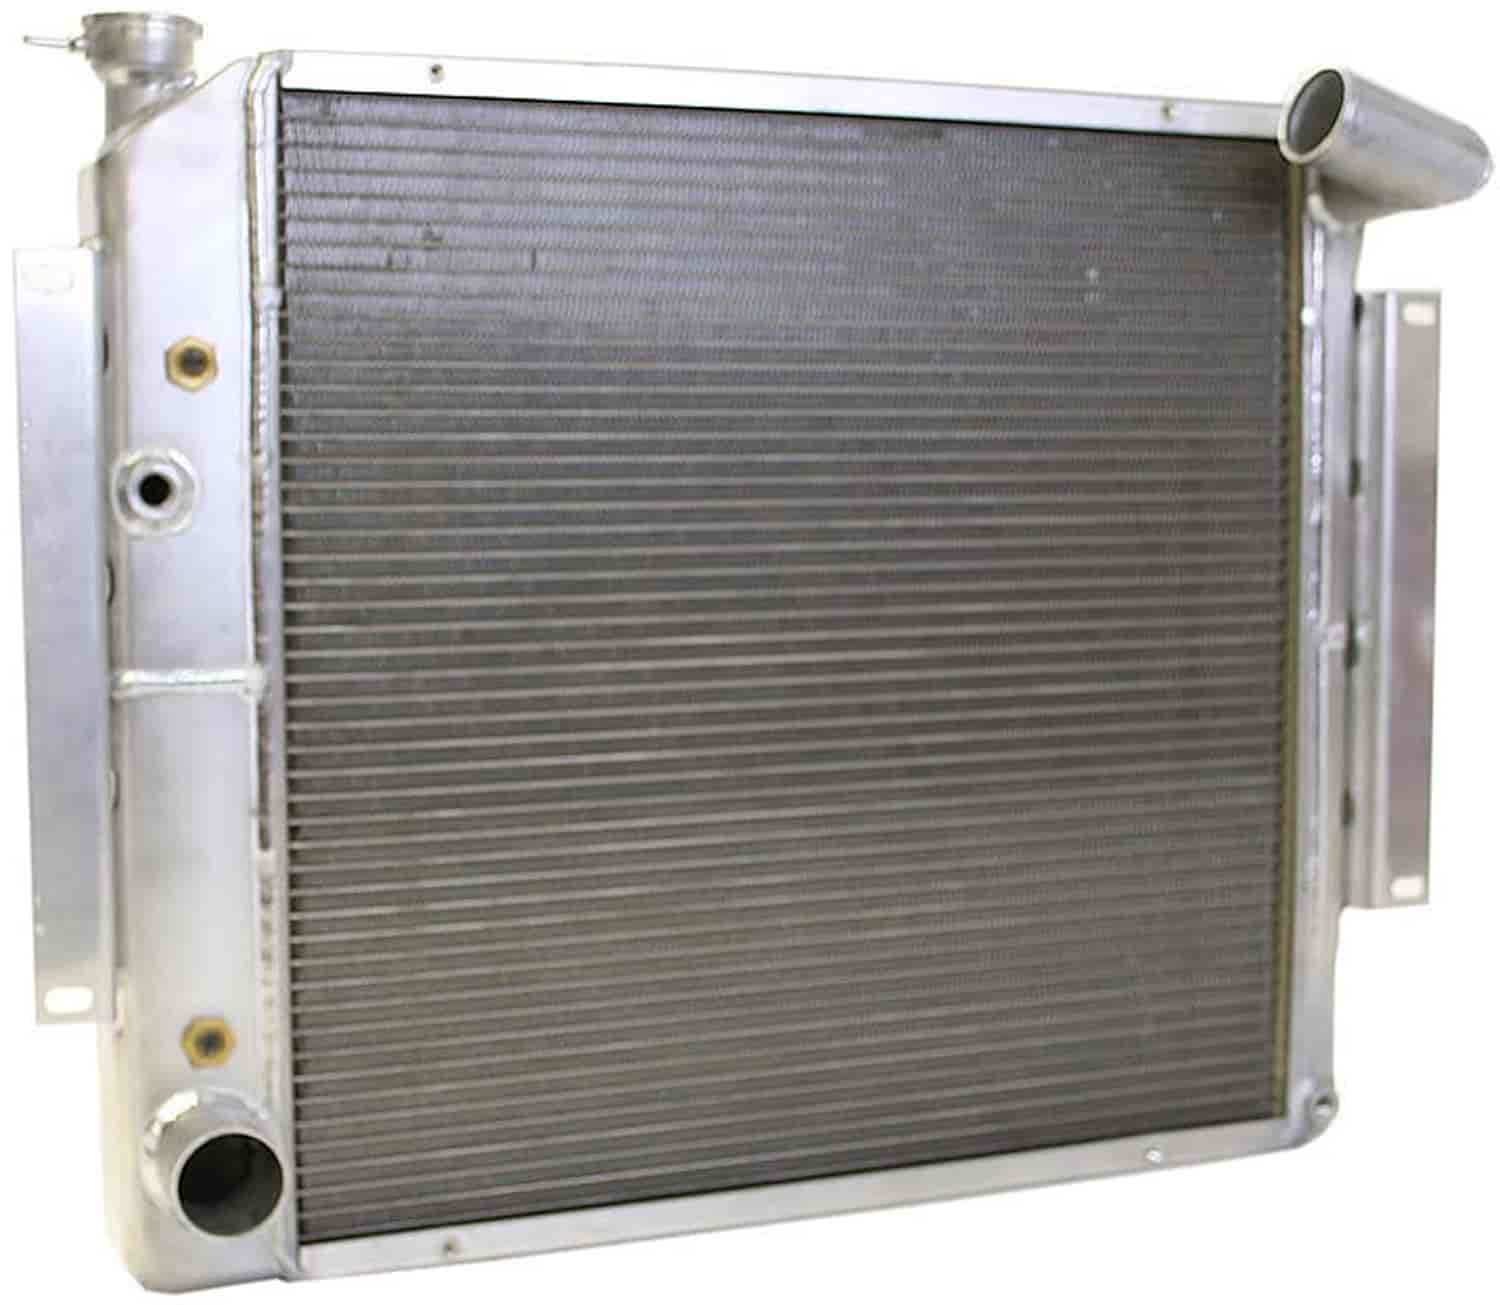 ExactFit Radiator for 1971-1980 International Scout